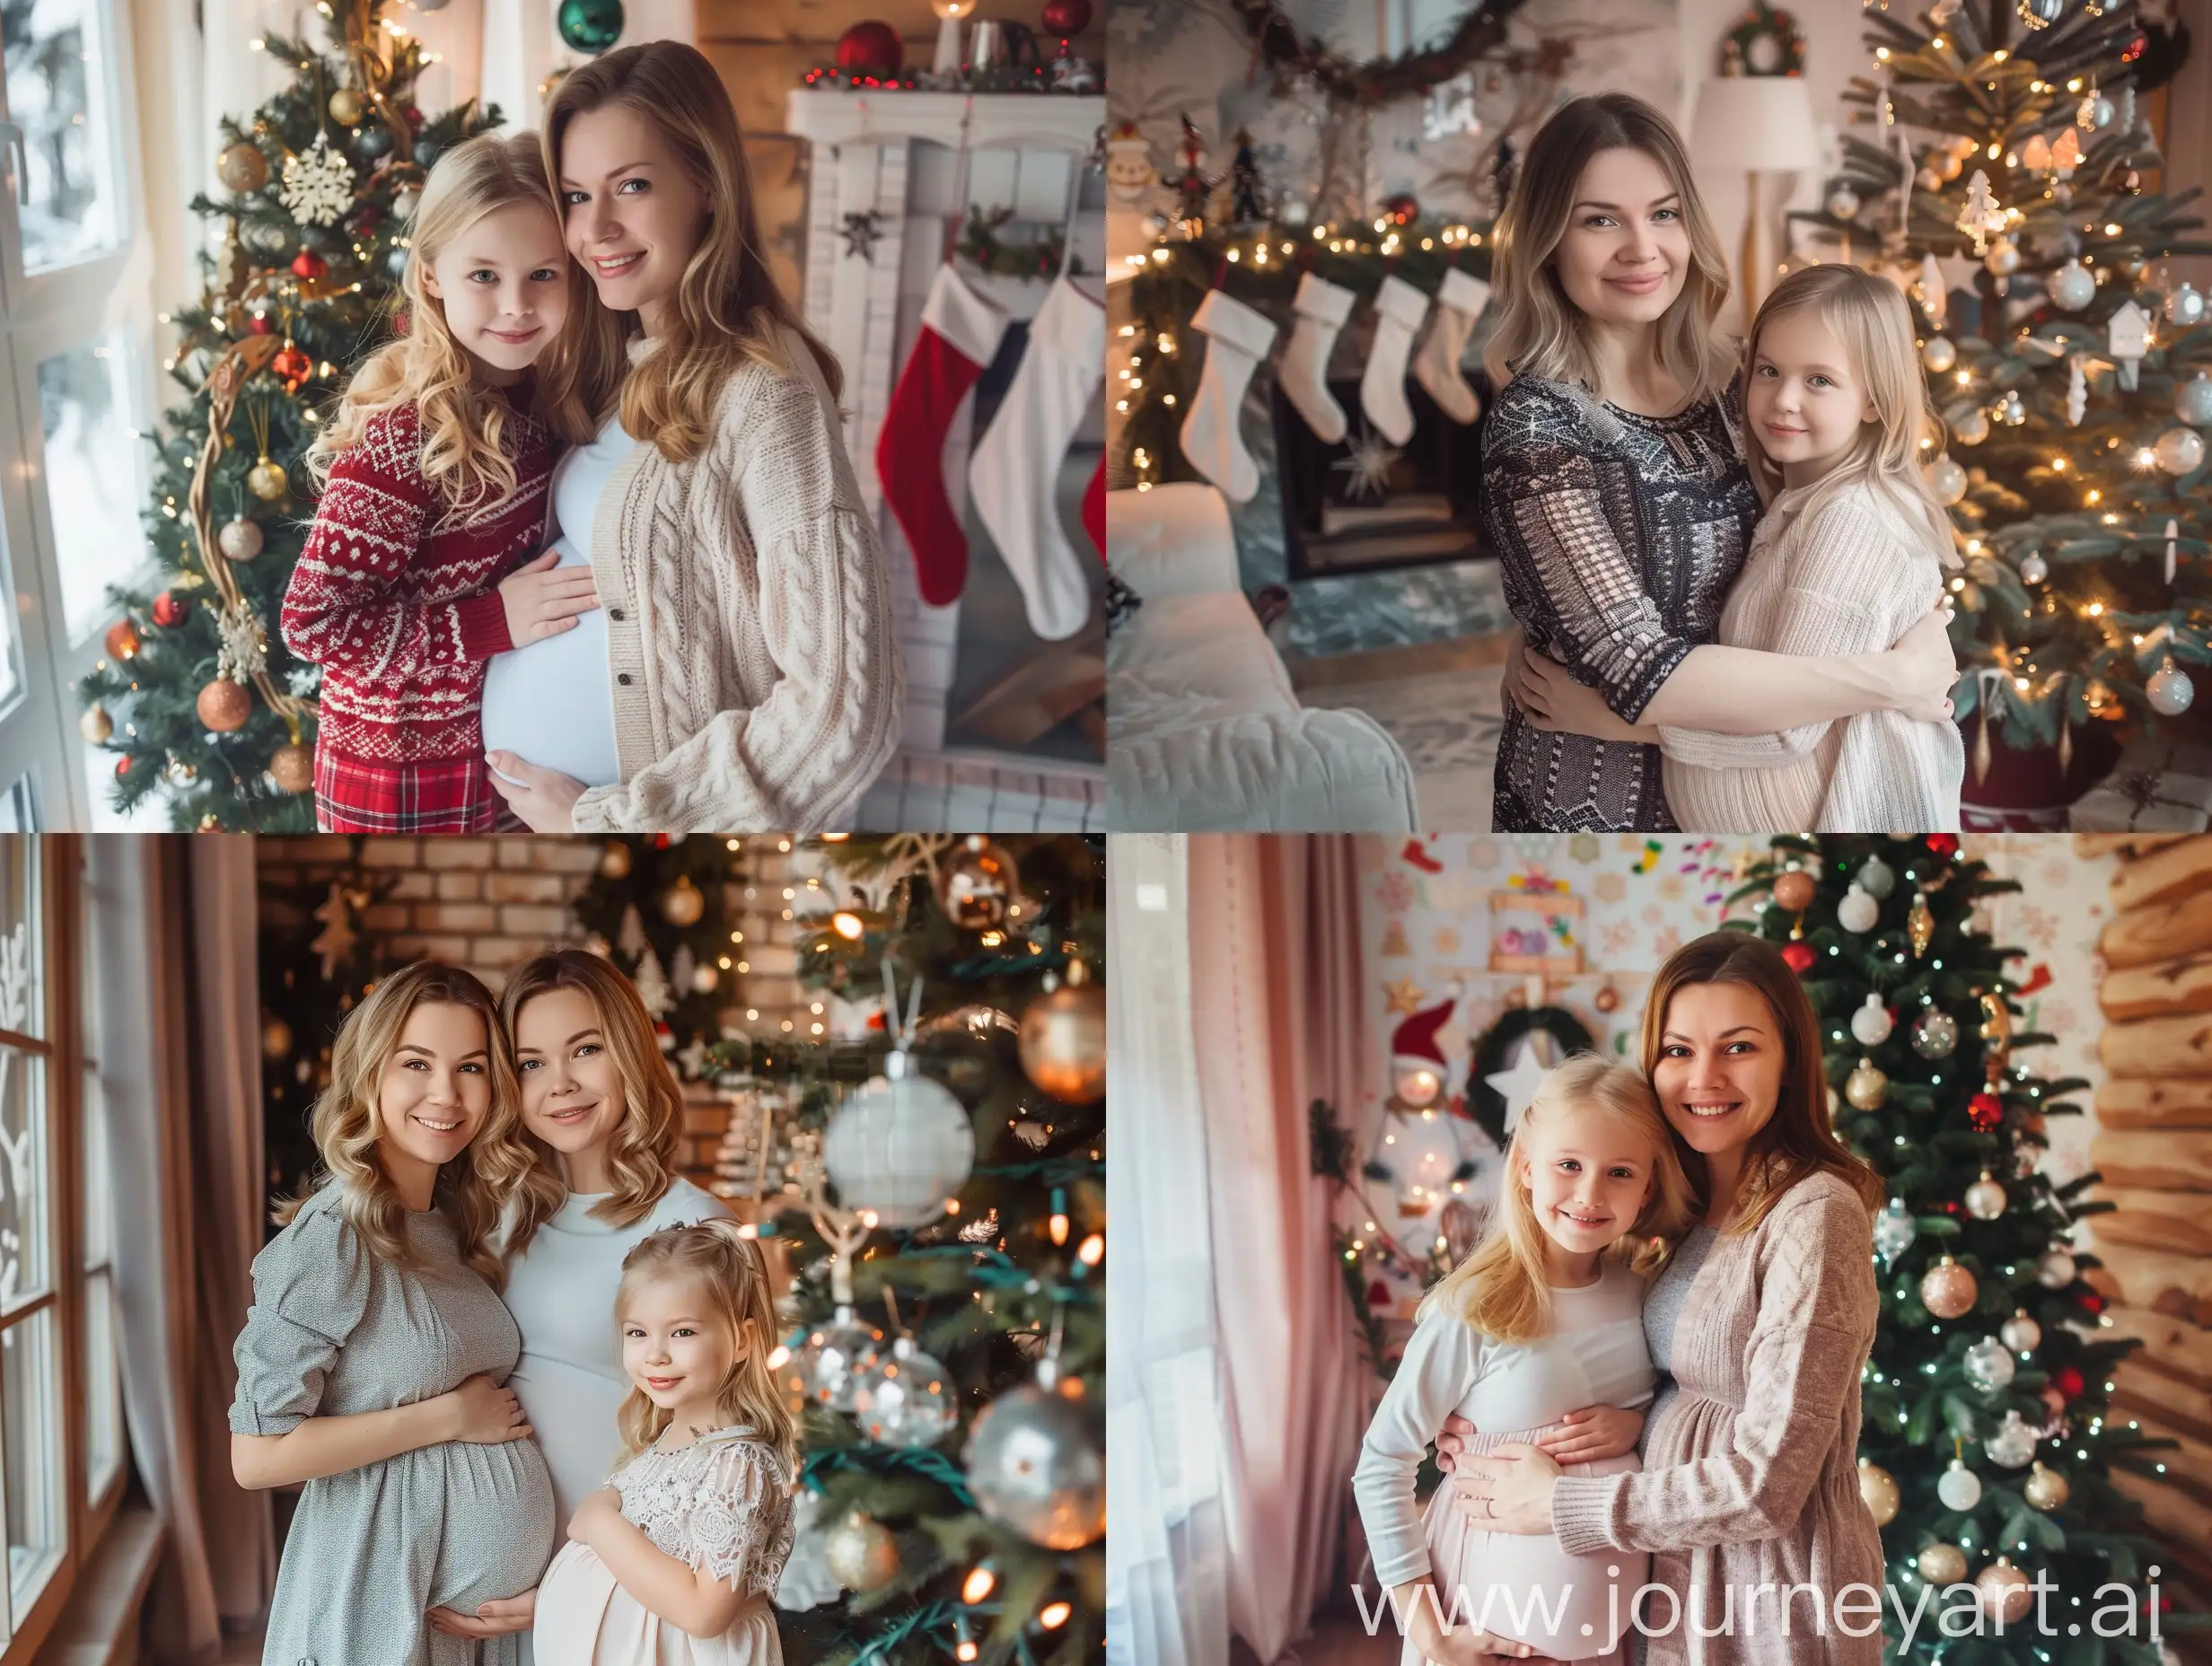 Photo: A Russian woman and a pregnant beautiful blonde girl are standing together at home in the photo together, next to the Christmas tree and the house is decorated for the new year.